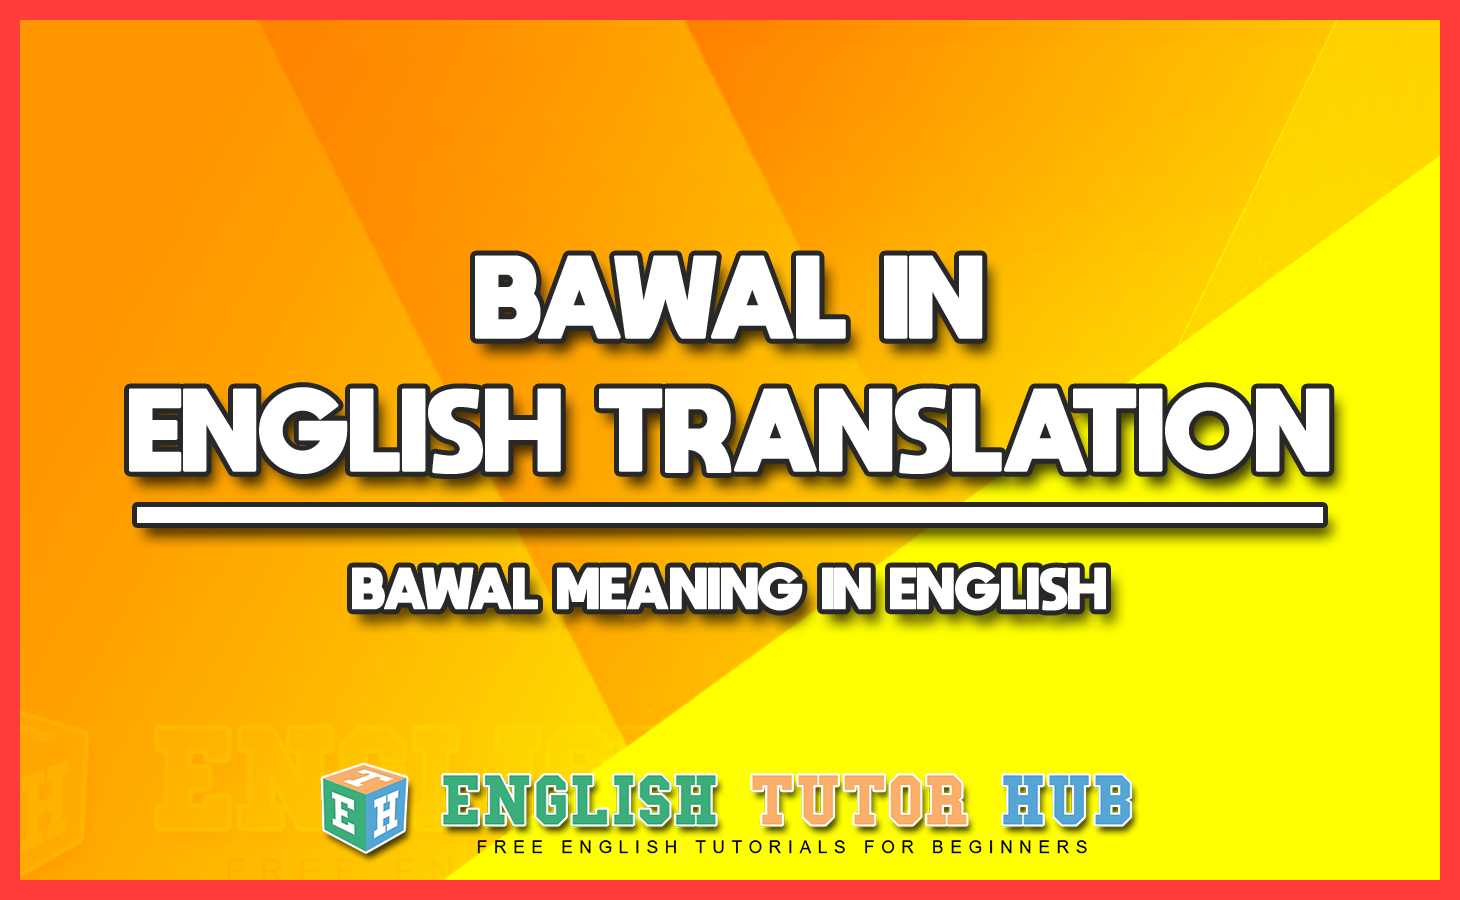 BAWAL IN ENGLISH TRANSLATION - BAWAL MEANING IN ENGLISH